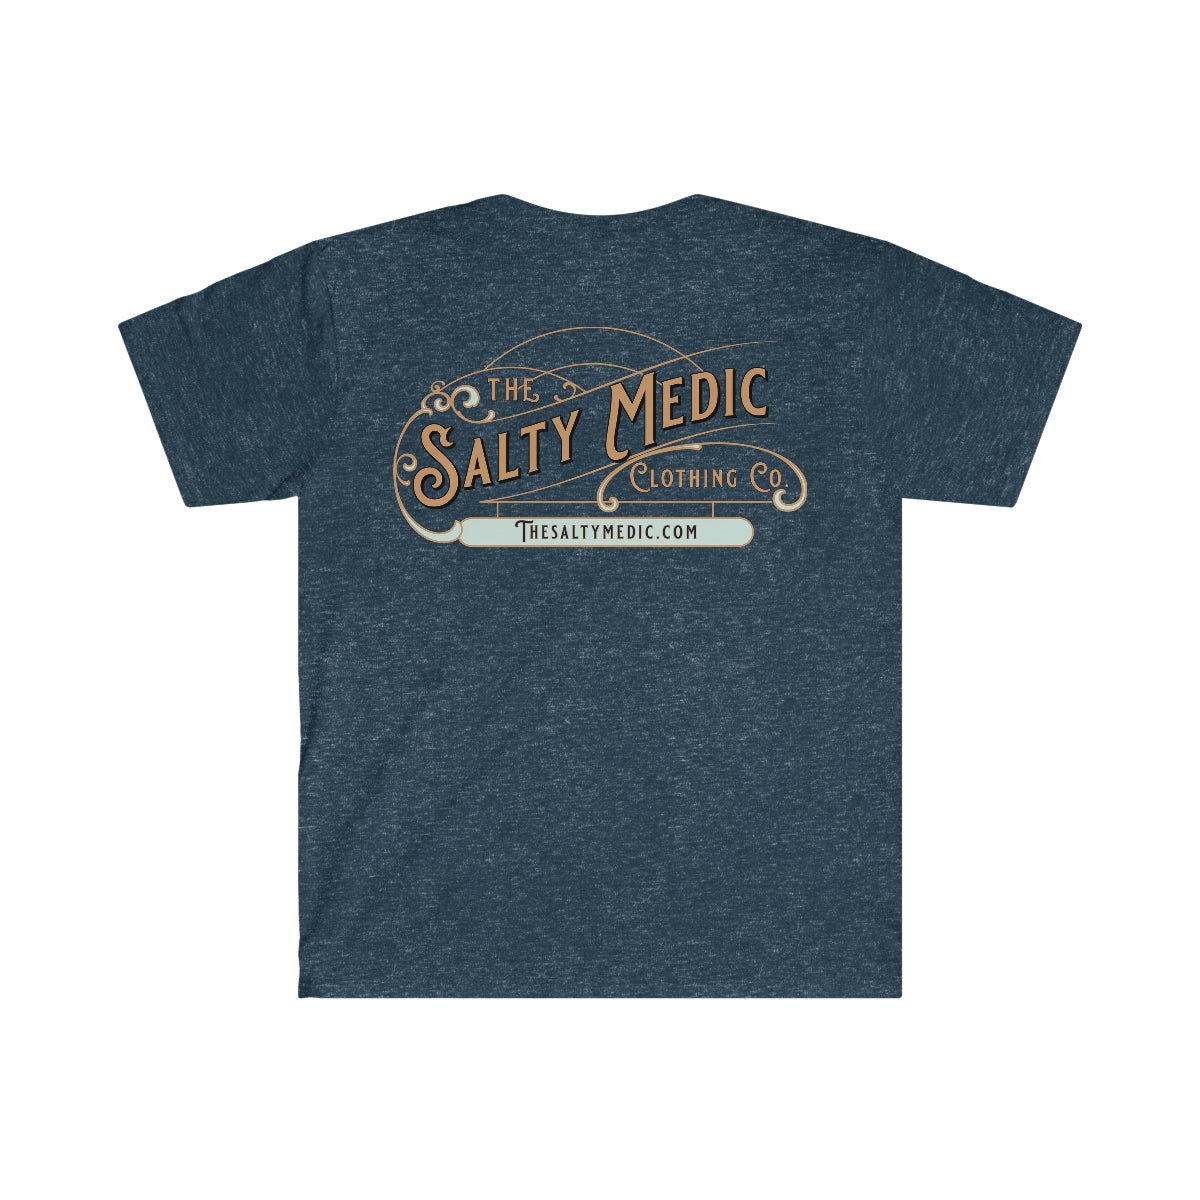 Hello, My Name Is Ambulance Driver Softstyle T-Shirt - Salty Medic Clothing Co.